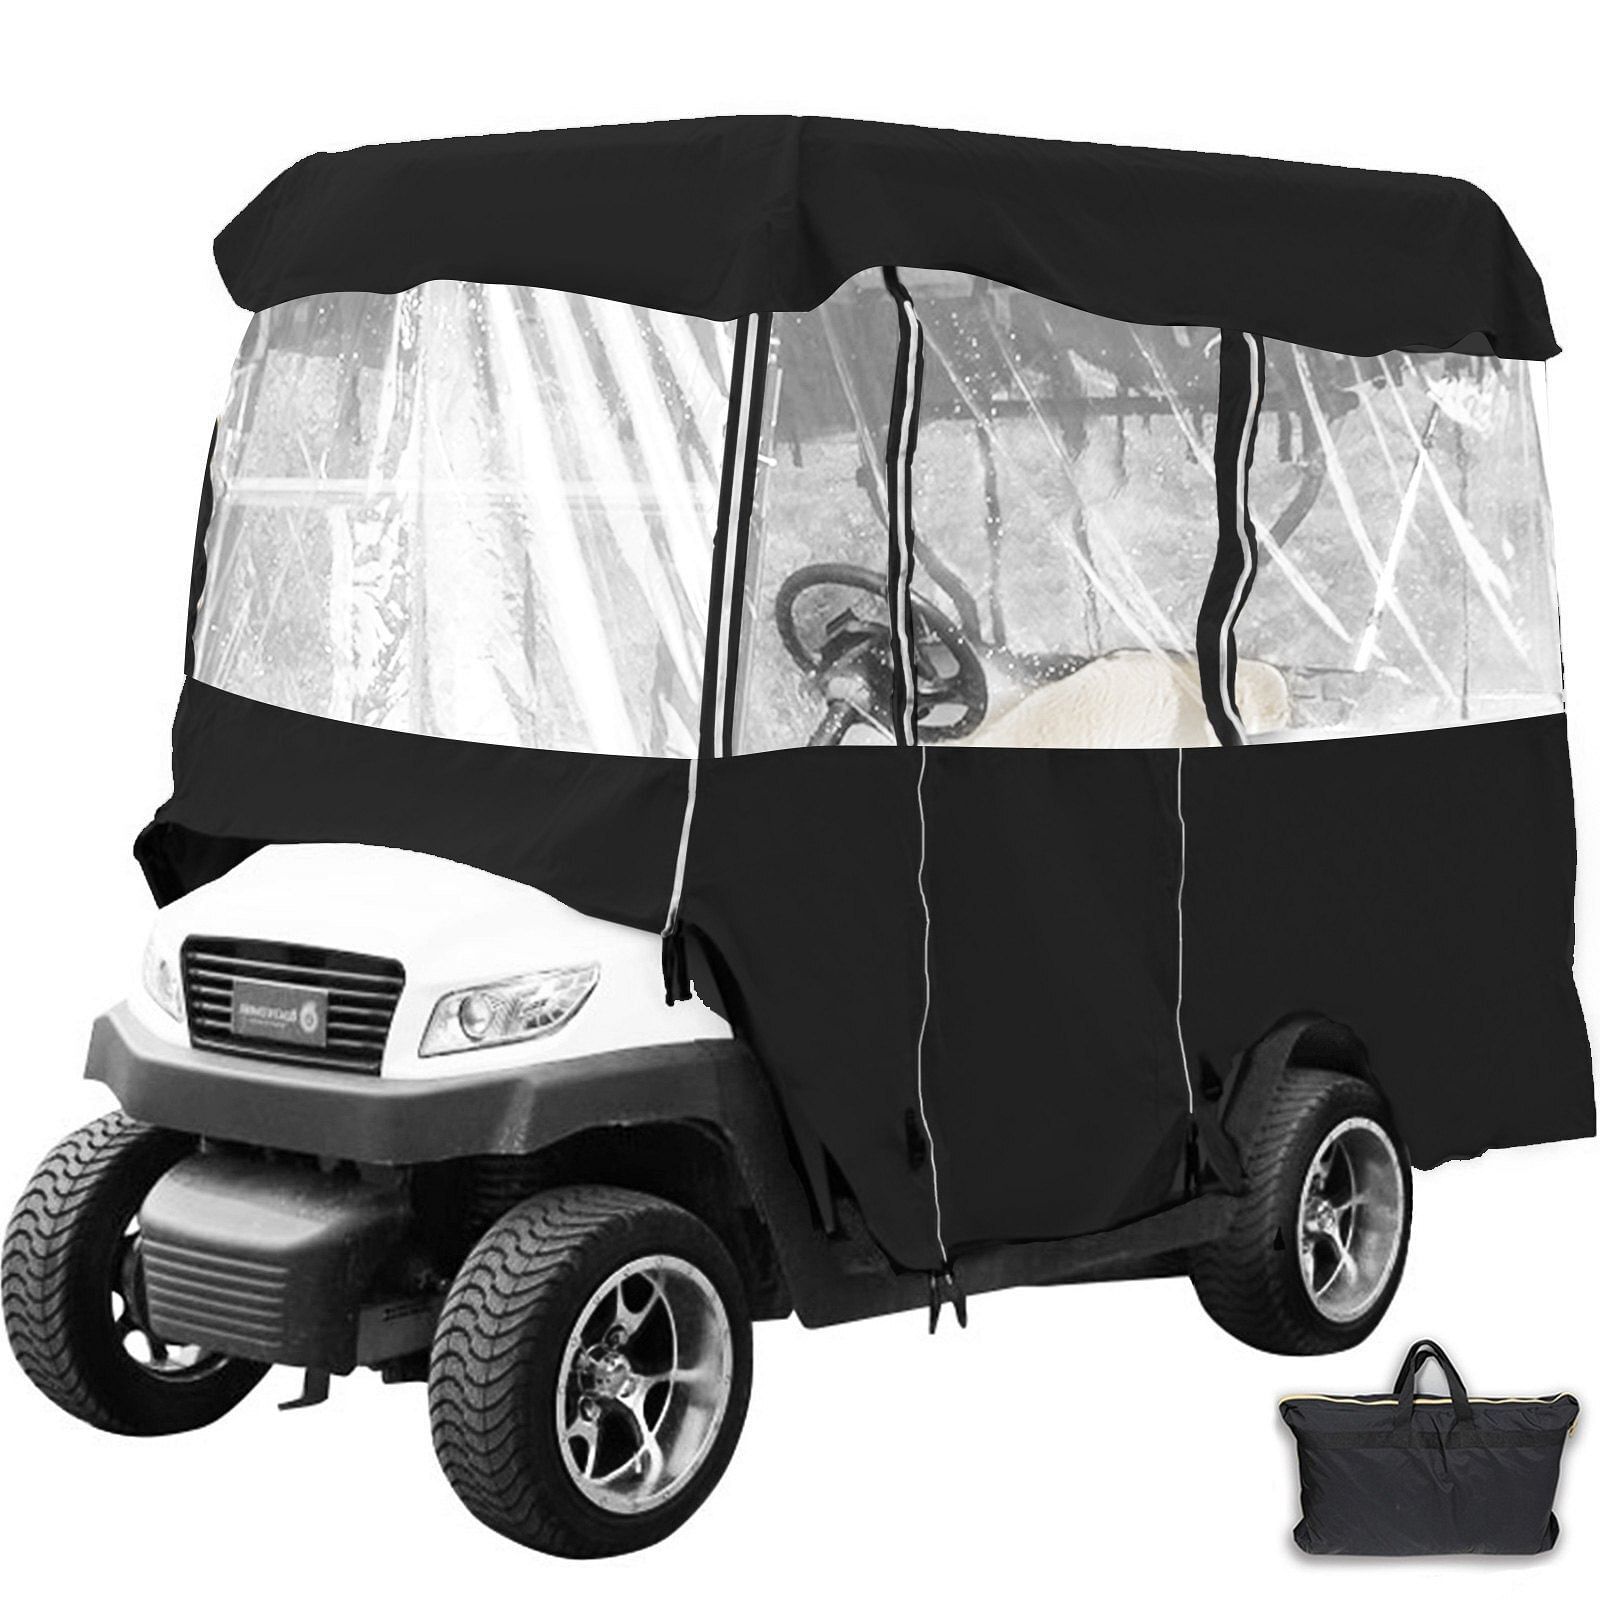 Primary image for VEVOR Golf Cart Enclosure, 4-Person Golf Cart Cover, 4-Sided Fairway Deluxe, 30